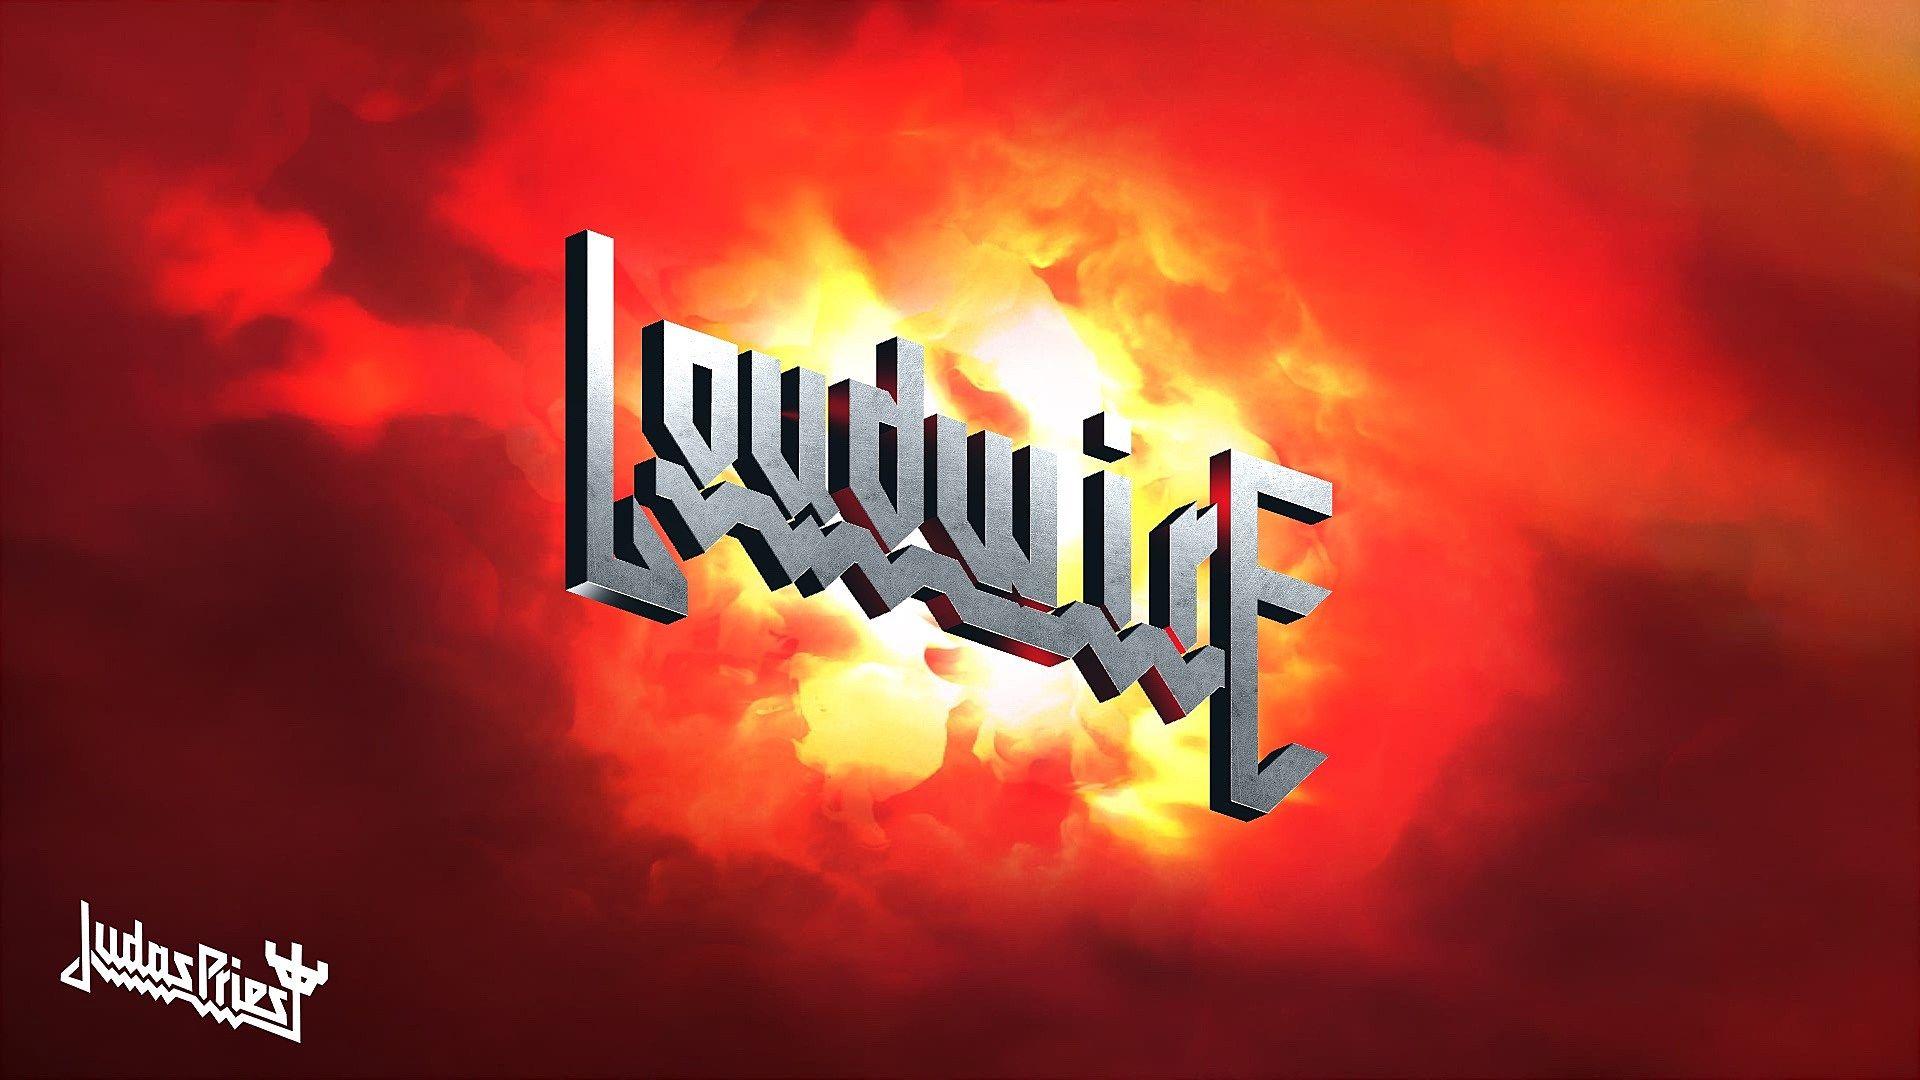 Judas Priest Logo - See How Your Name Looks in Judas Priest's Logo Font